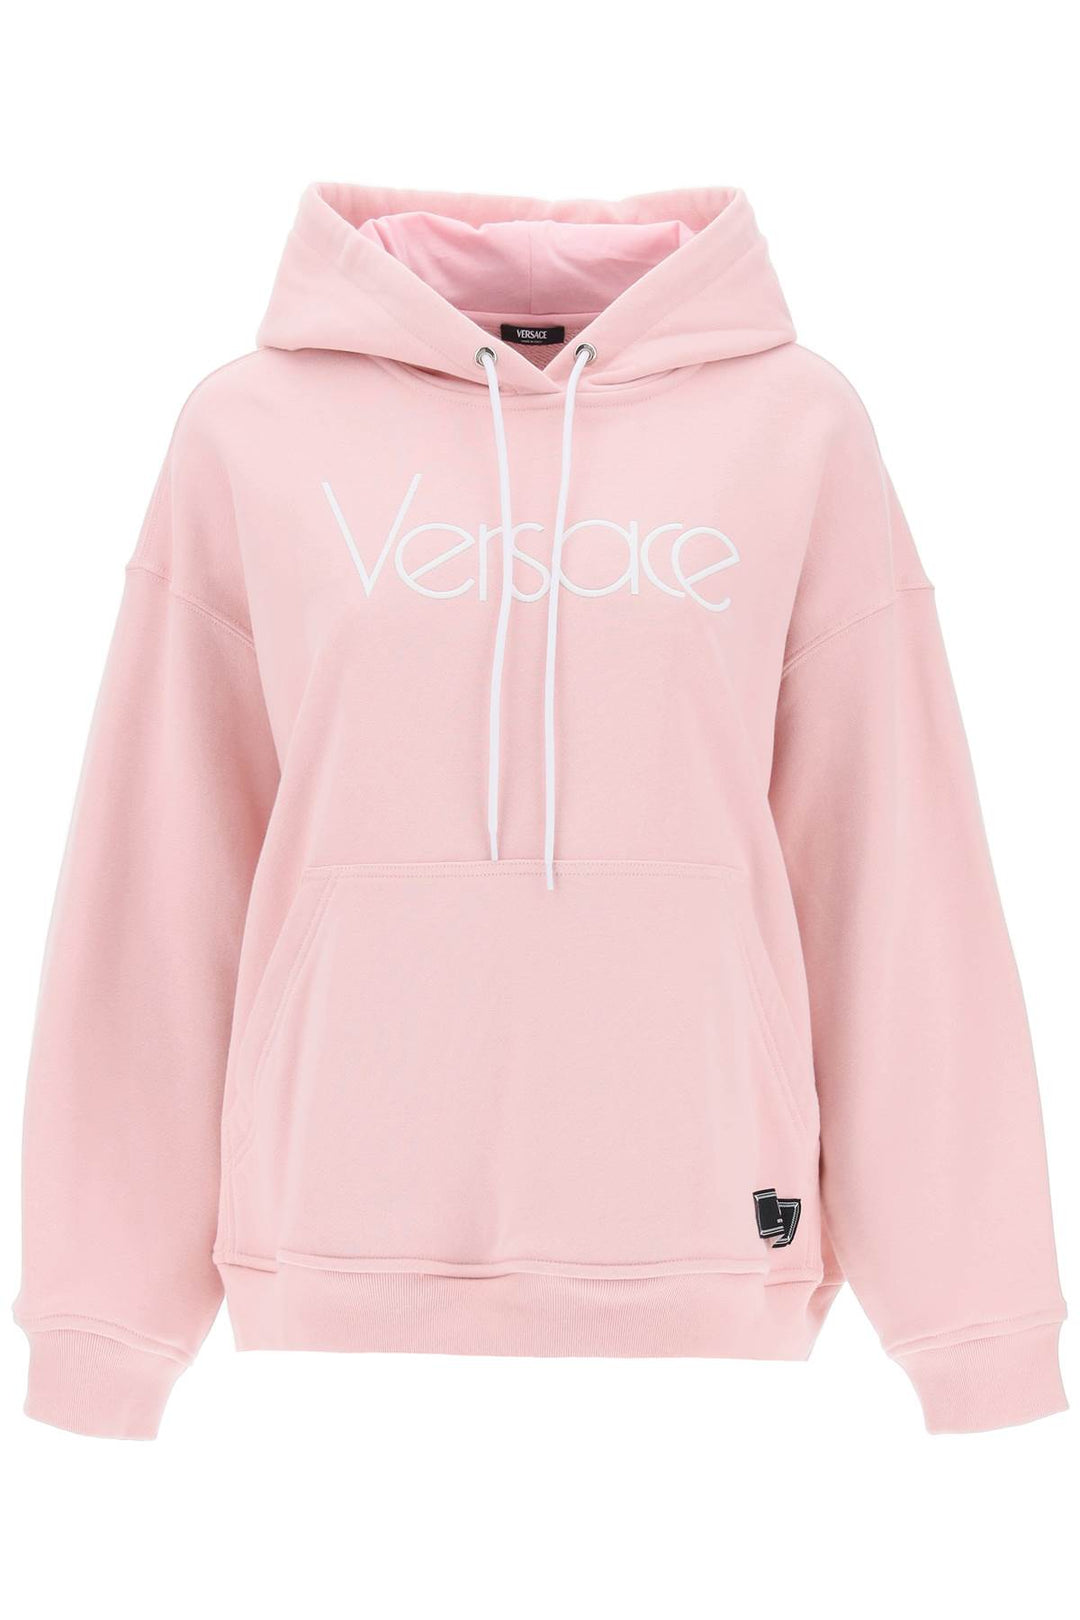 Versace Hoodie With 1978 Re Edition Logo   Rosa